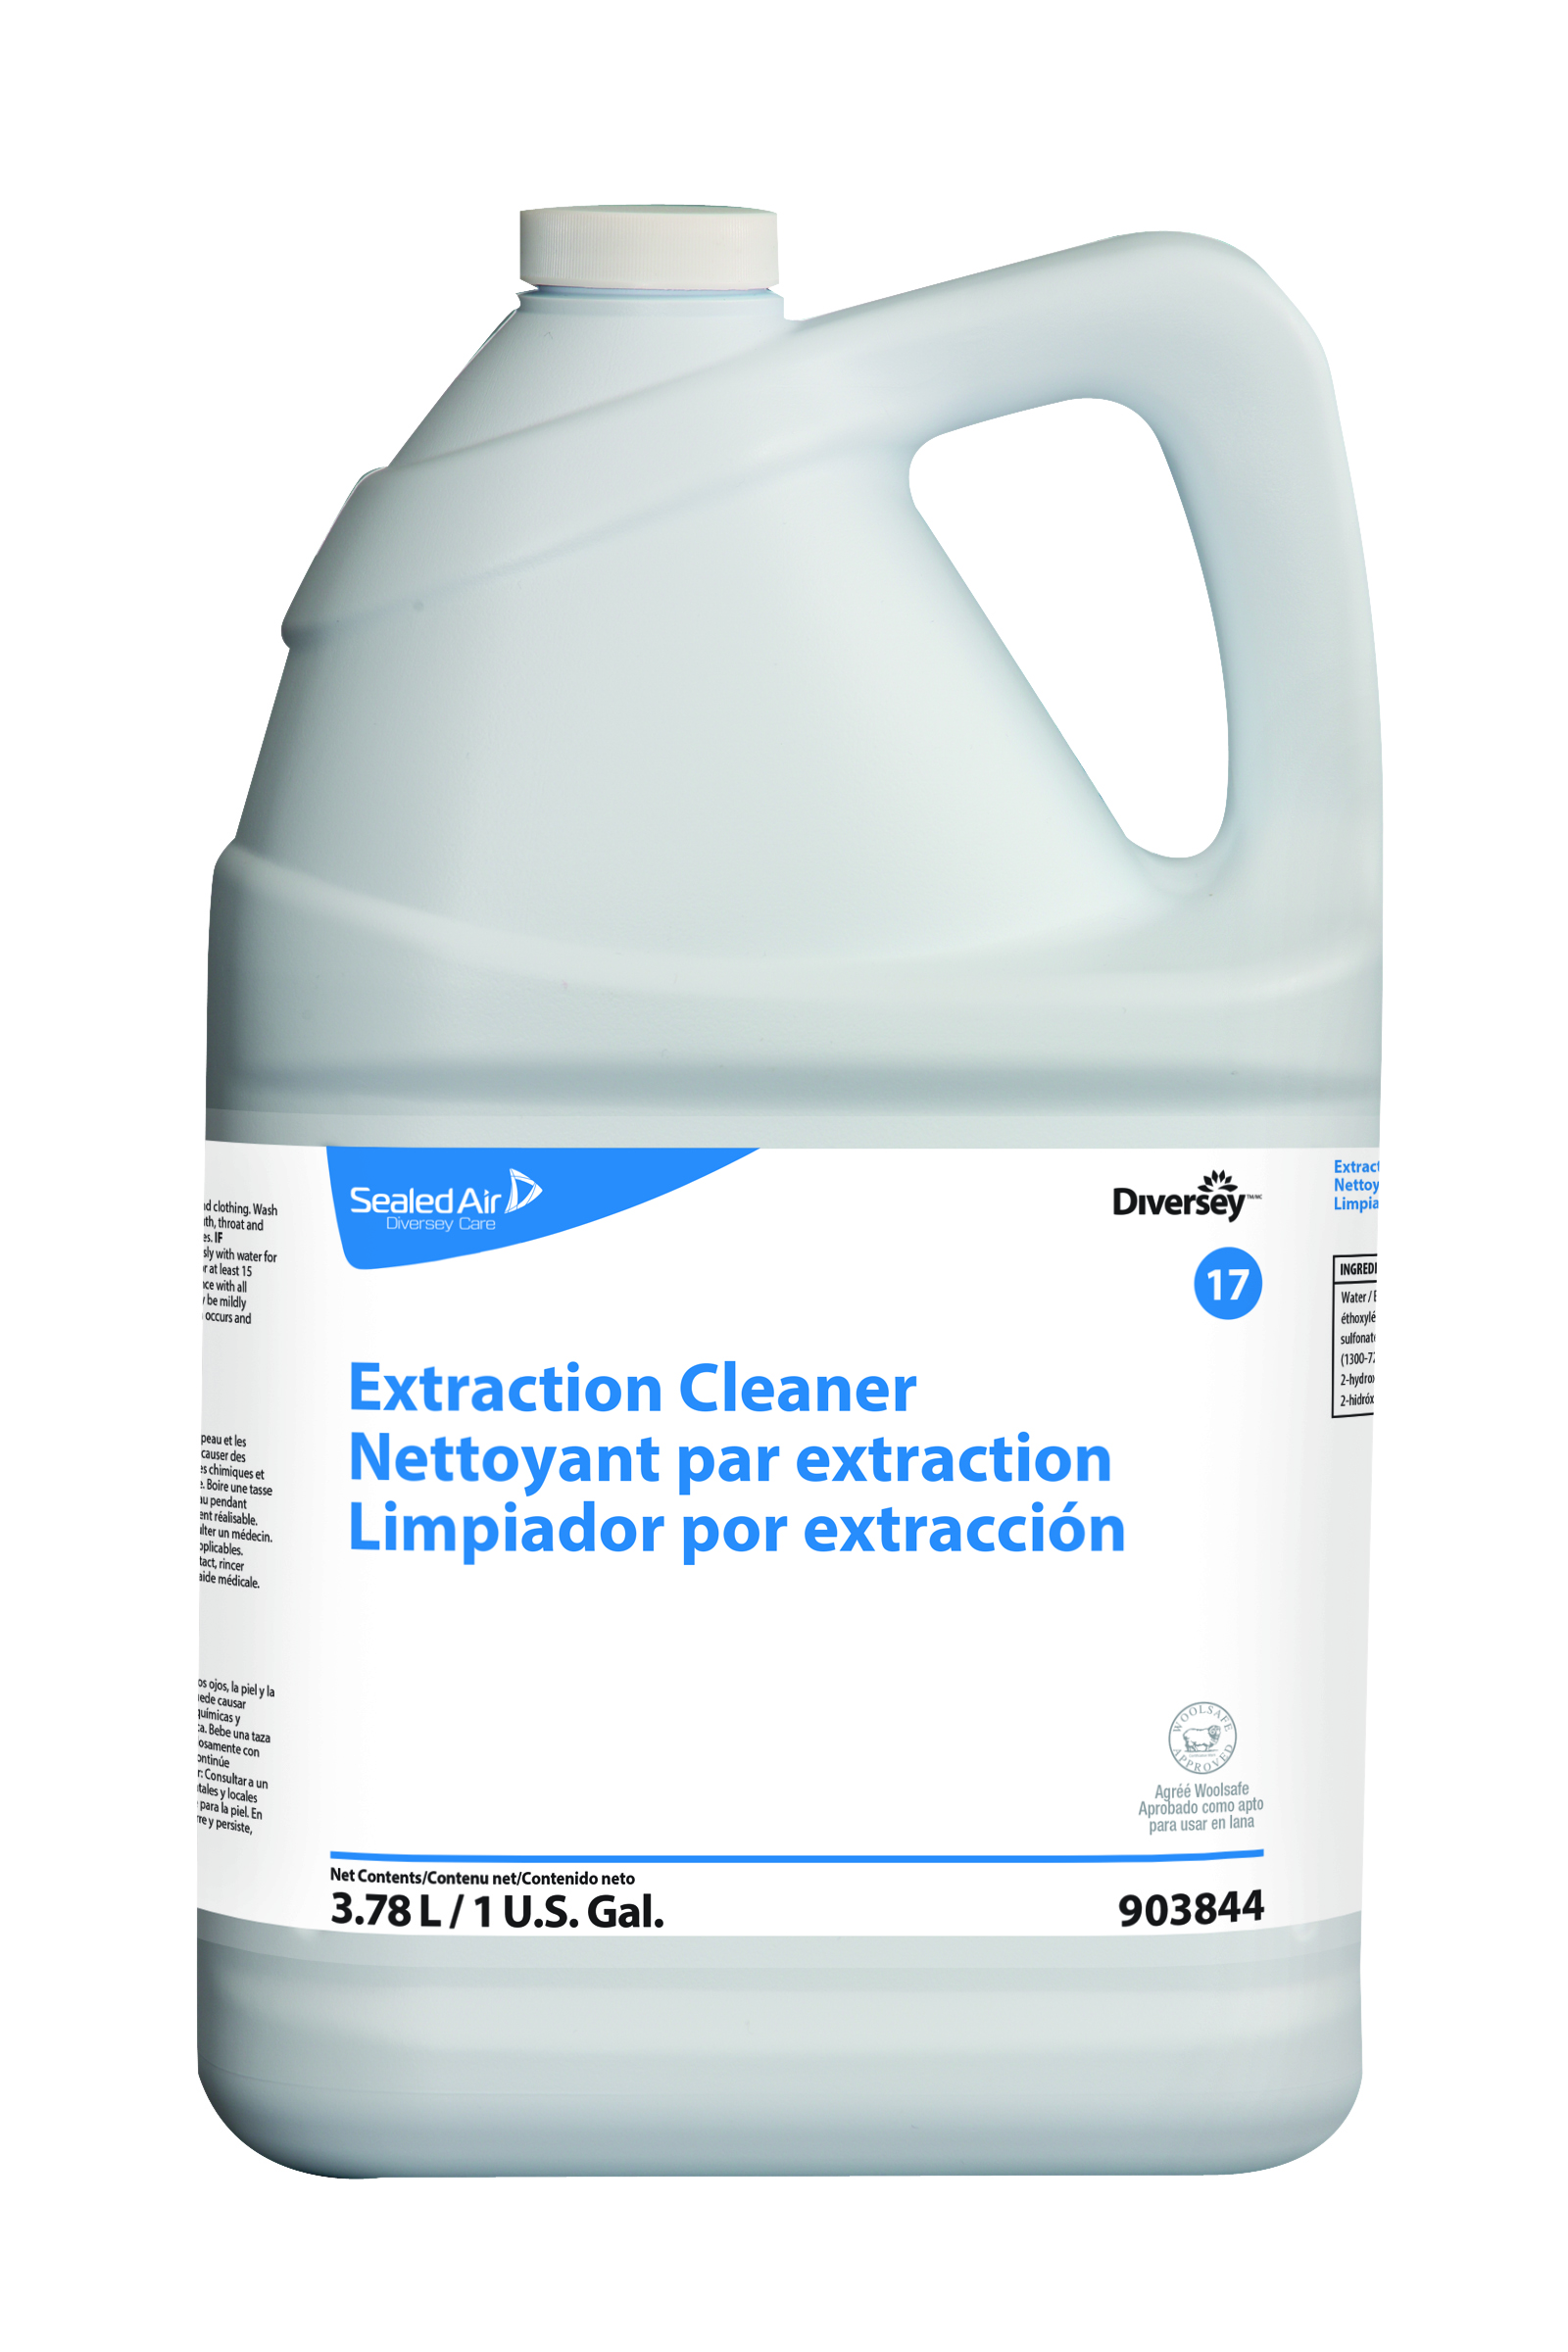 PicturesLogo/EXTRACTION CLEANERS.jpg